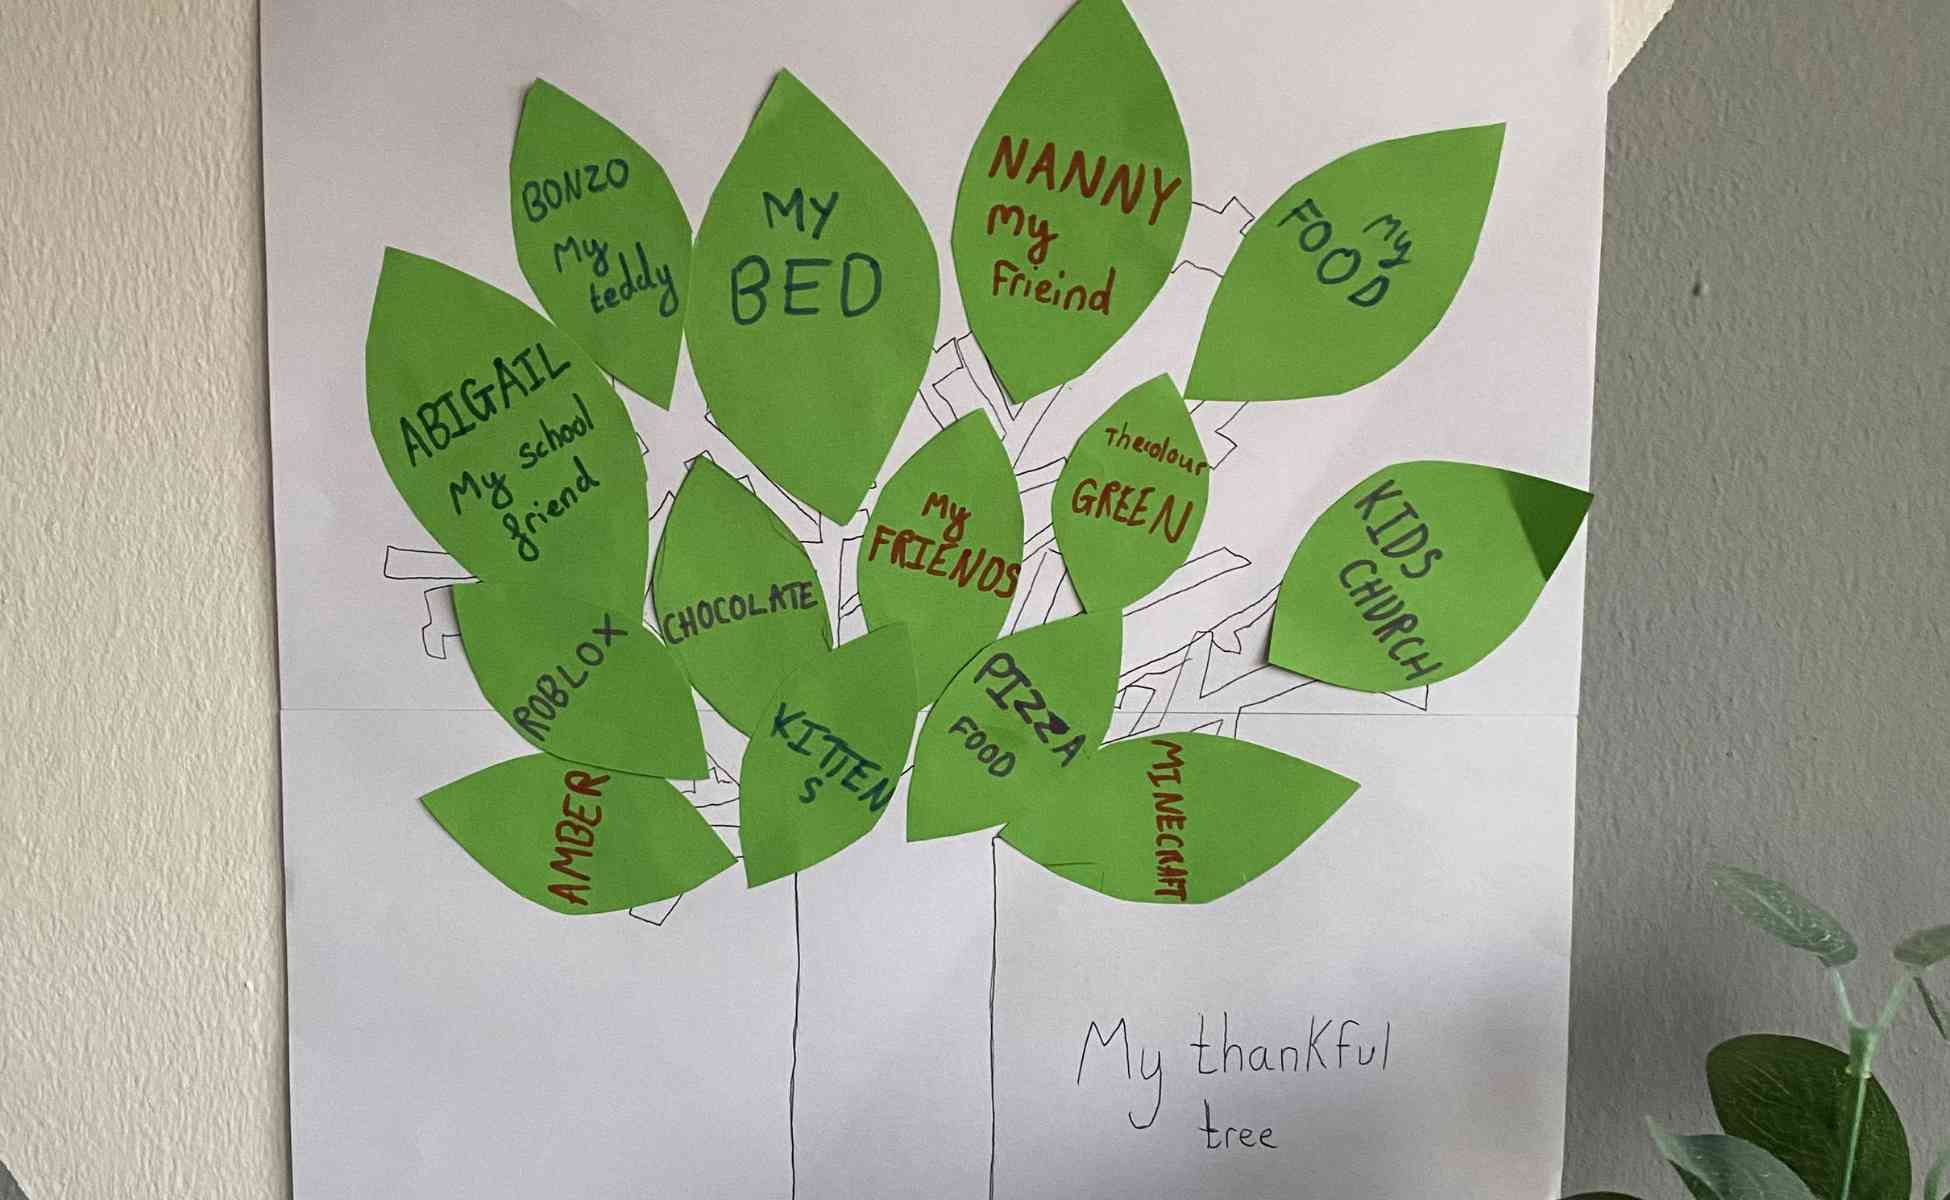 Thankful tree activity - Photo of a hand drawn tree with green leaves with writing on